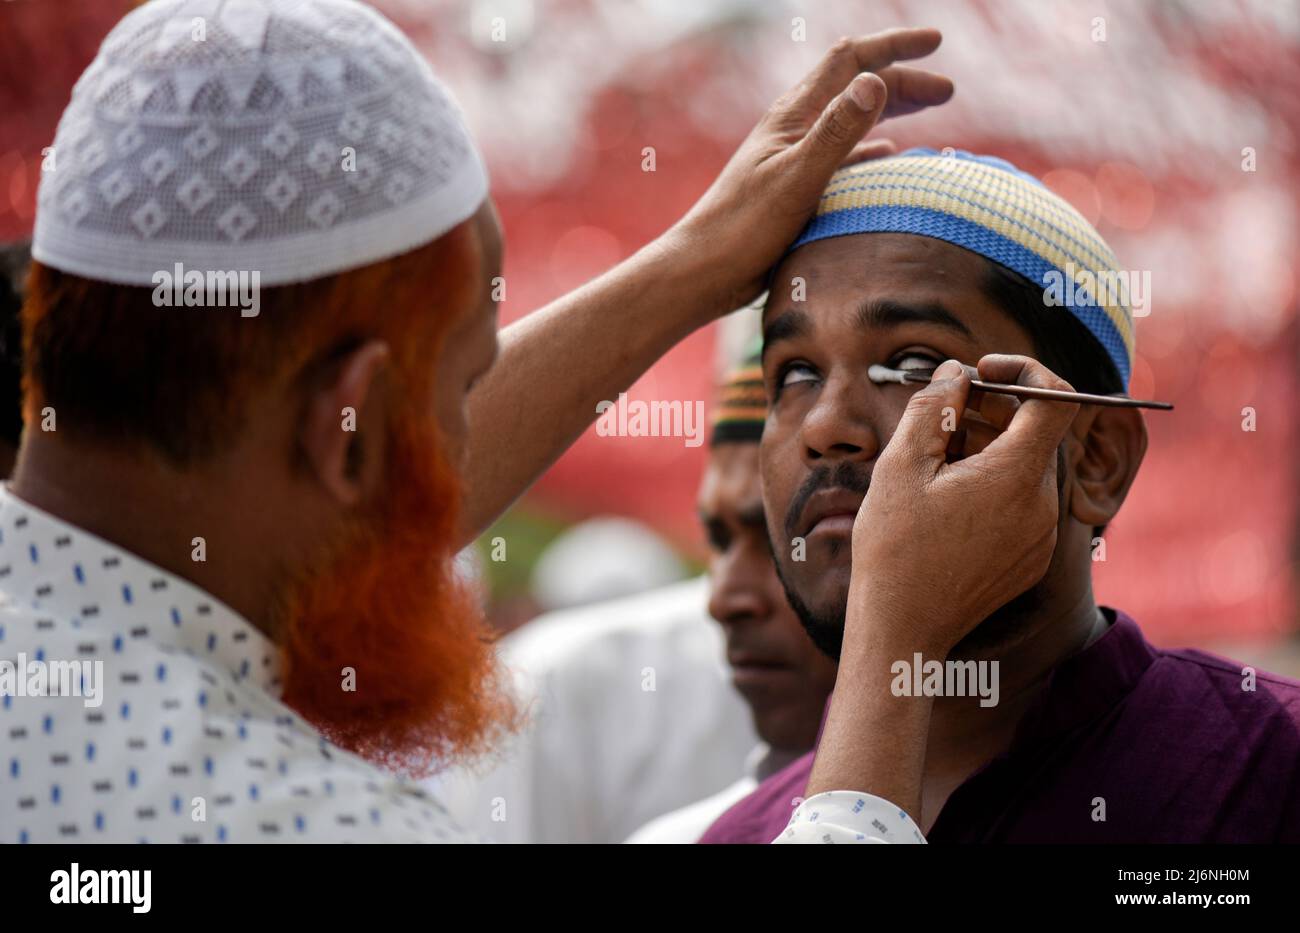 Guwahati, Assam, India. 03rd May, 2022. A Muslim man applying Surma on eyes before offer prayer at a Eidgah to start the Eid al-Fitr festival, which marks the end of their holy fasting month of Ramadan, in Guwahati, Assam, India on May 03, 2022. Credit: David Talukdar/Alamy Live News Stock Photo